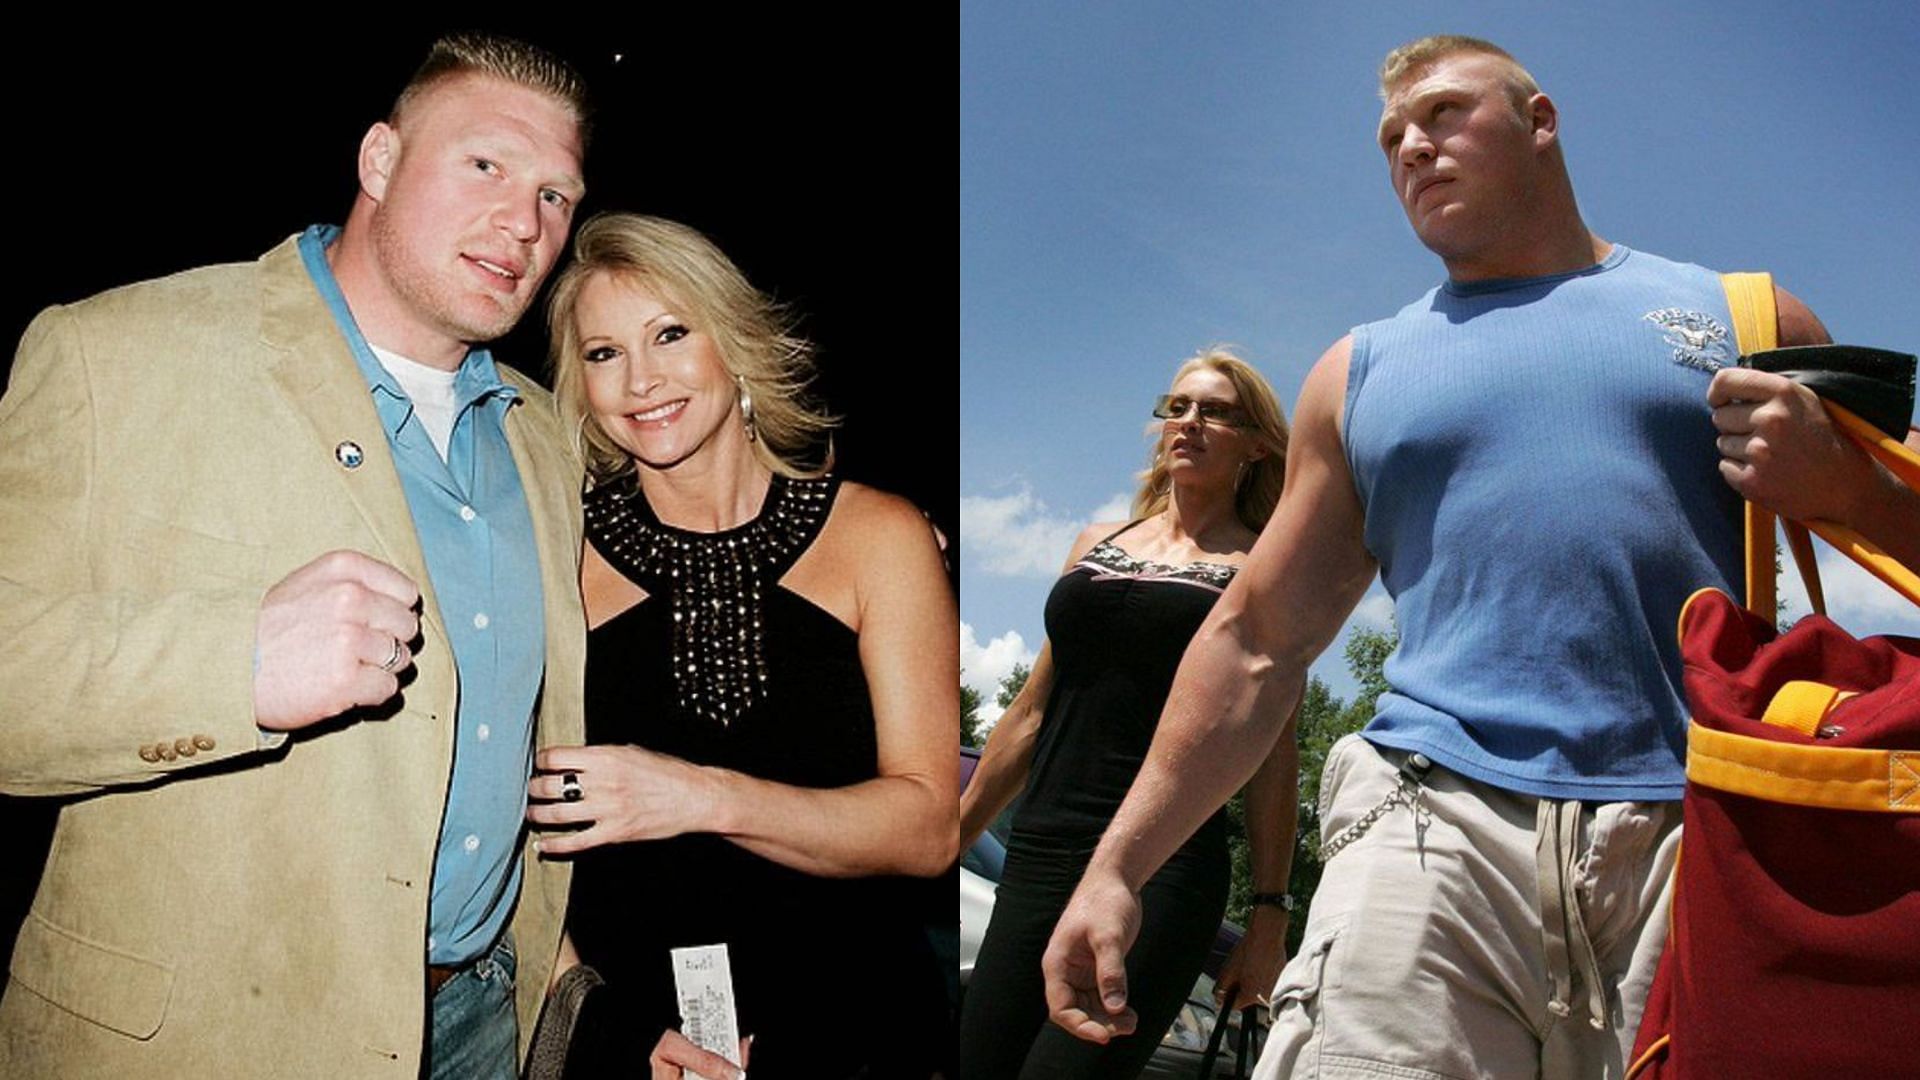 5 things you may not know about Brock Lesnar and Sables relationship